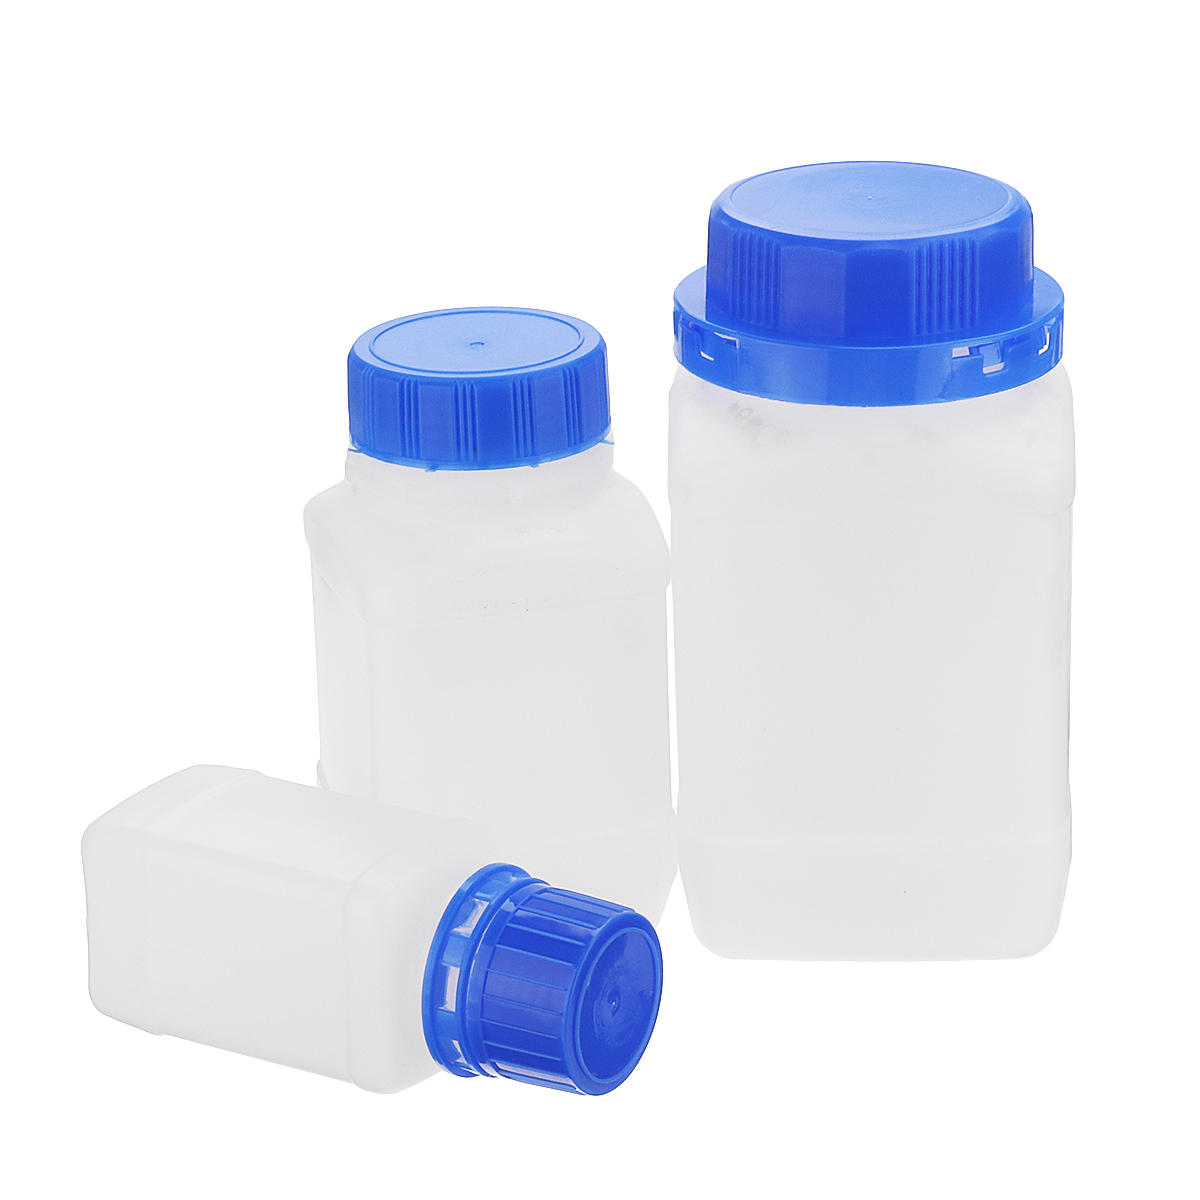 100250500ml Plastic Square Sample Sealing Bottle Wide Mouth Reagent Bottles with Blue Screw Cap Laboratory Experiment